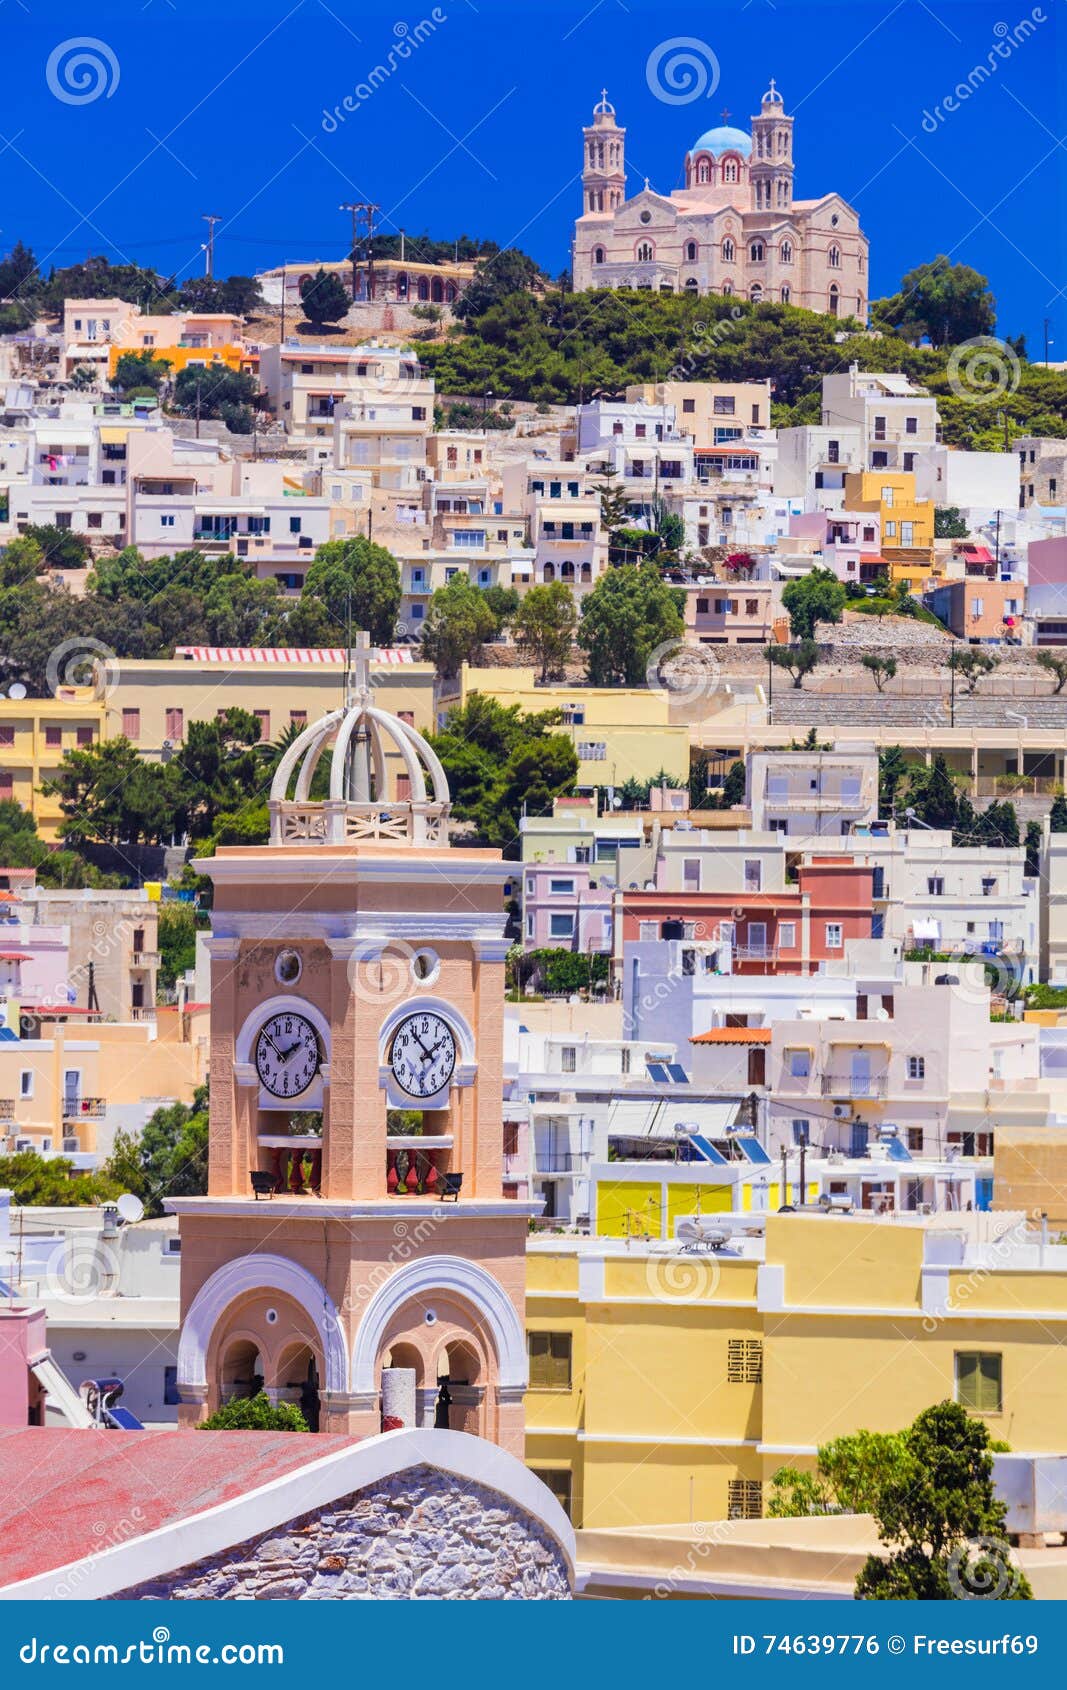 colors of greece series - syros island , view of ano syros vill